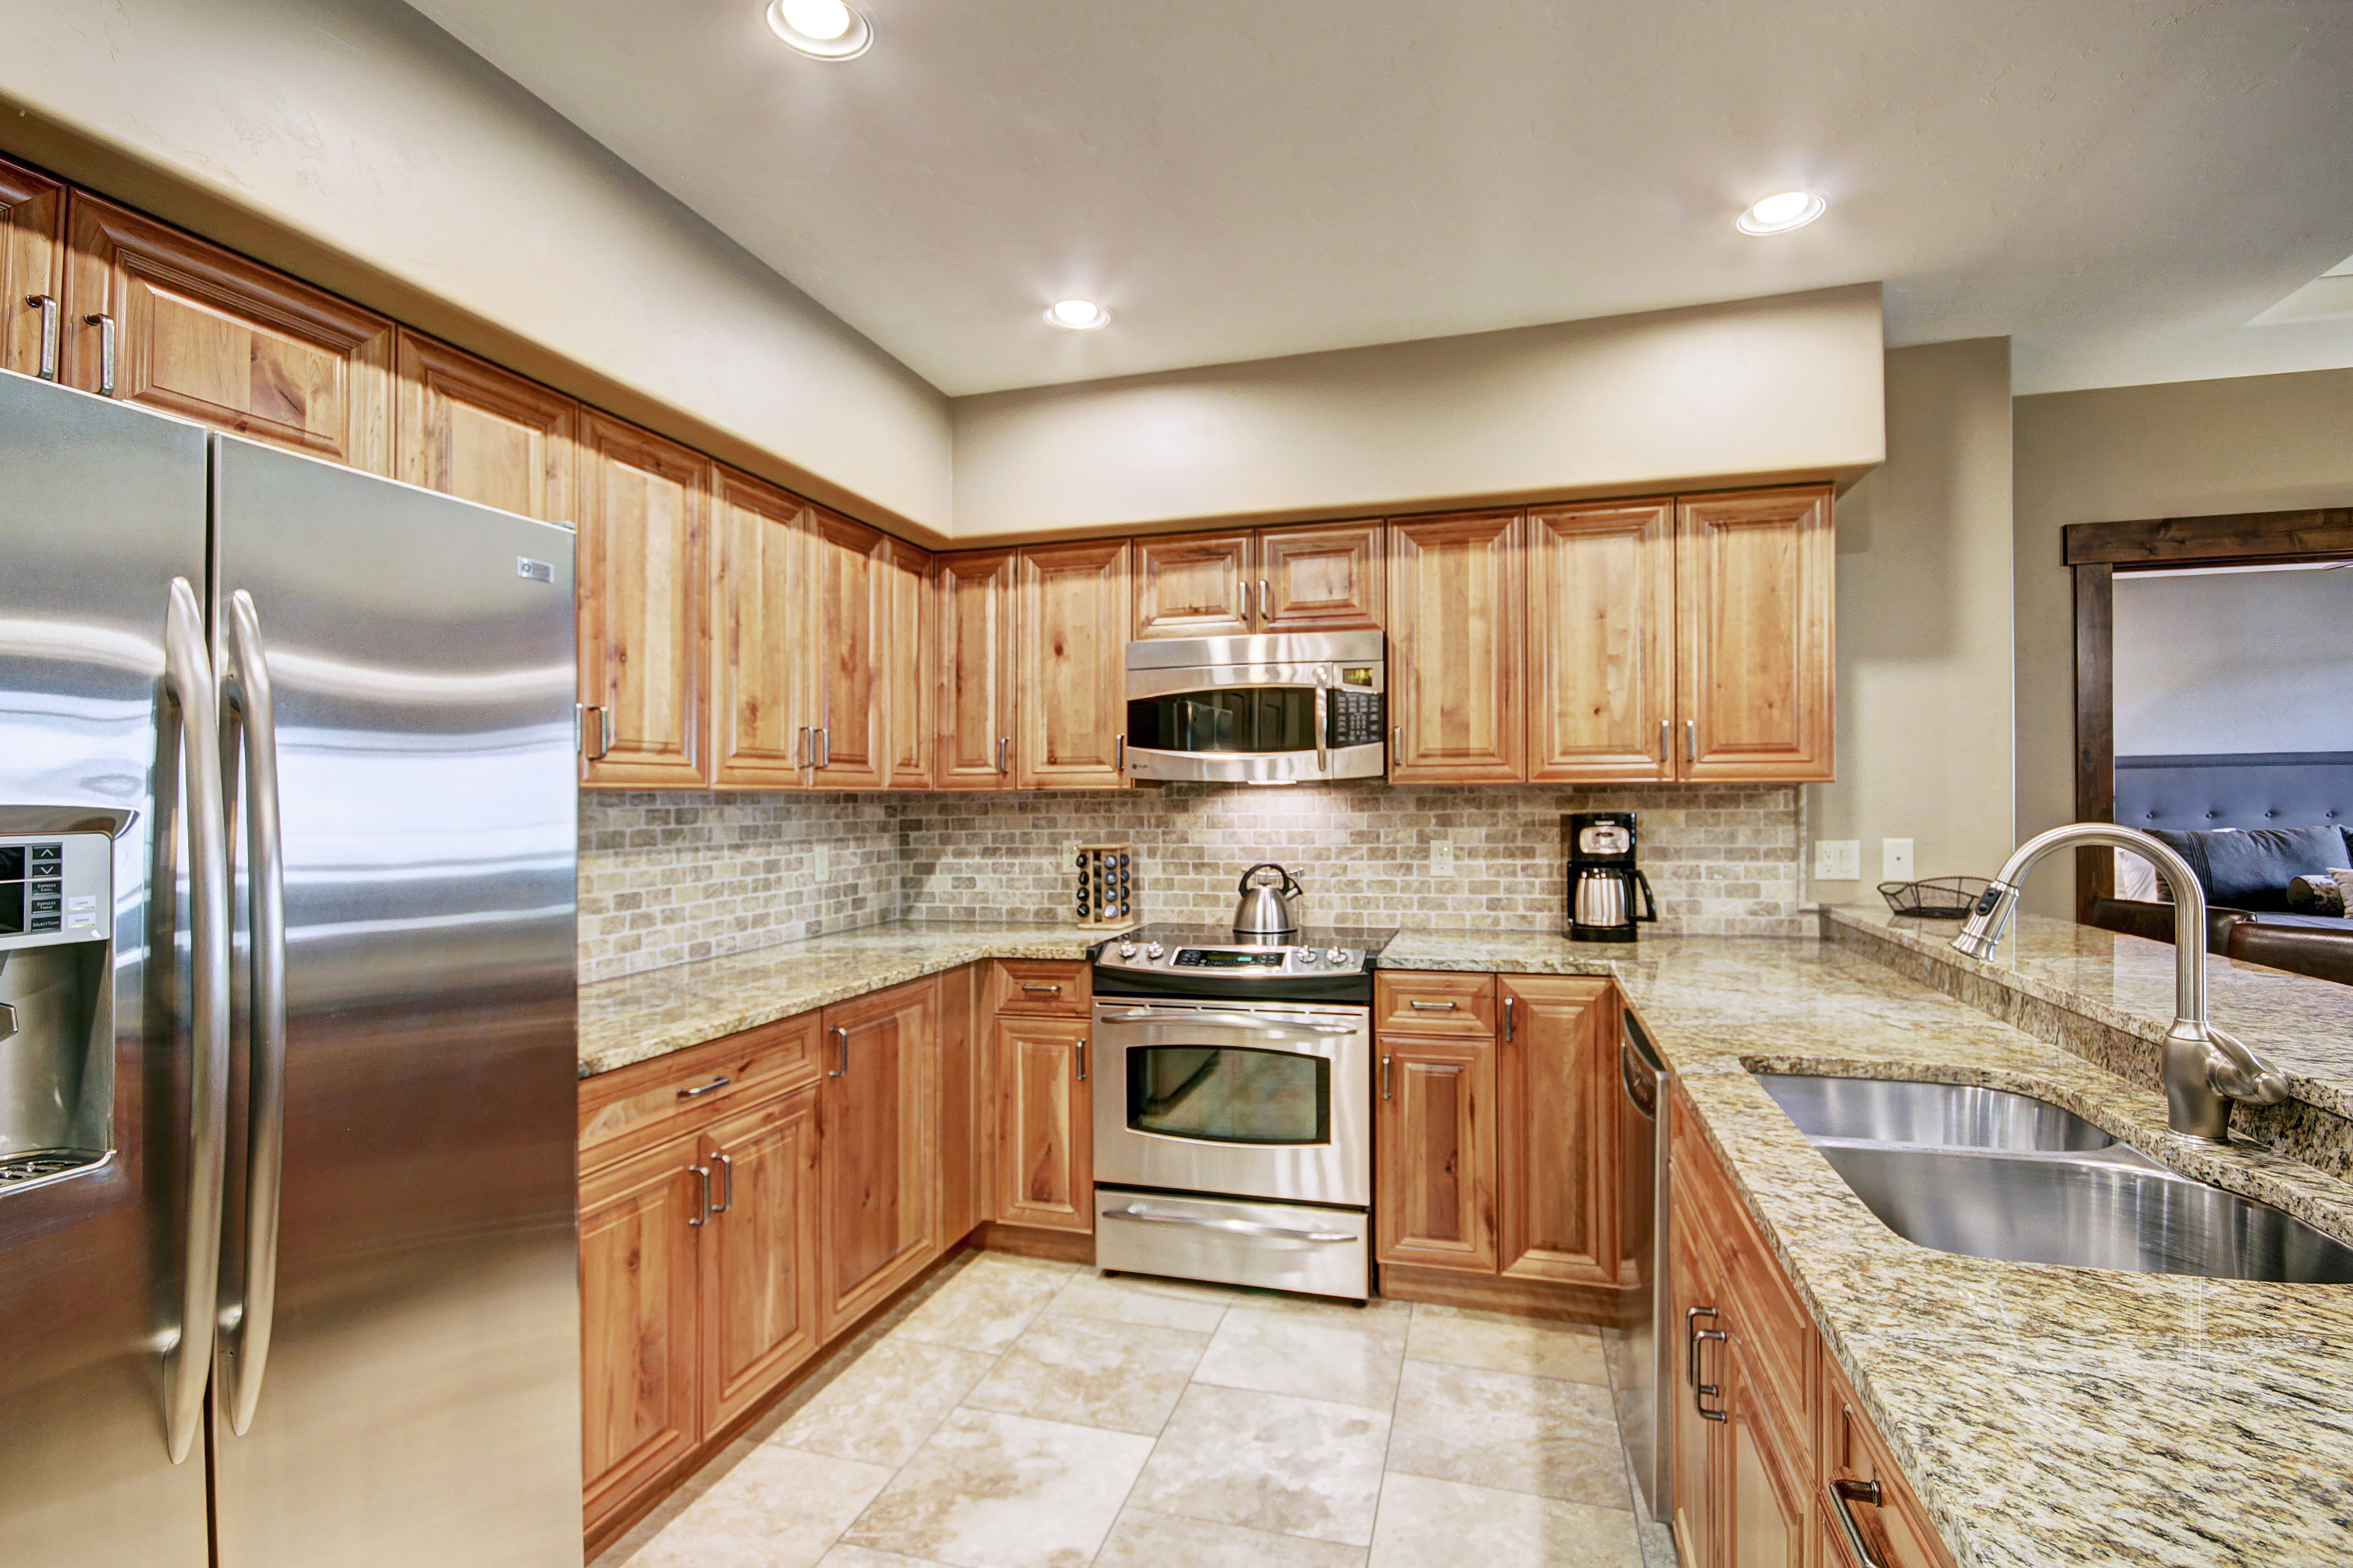 The well-equipped kitchen has a 12 cup coffee maker, toaster & slow cooker.